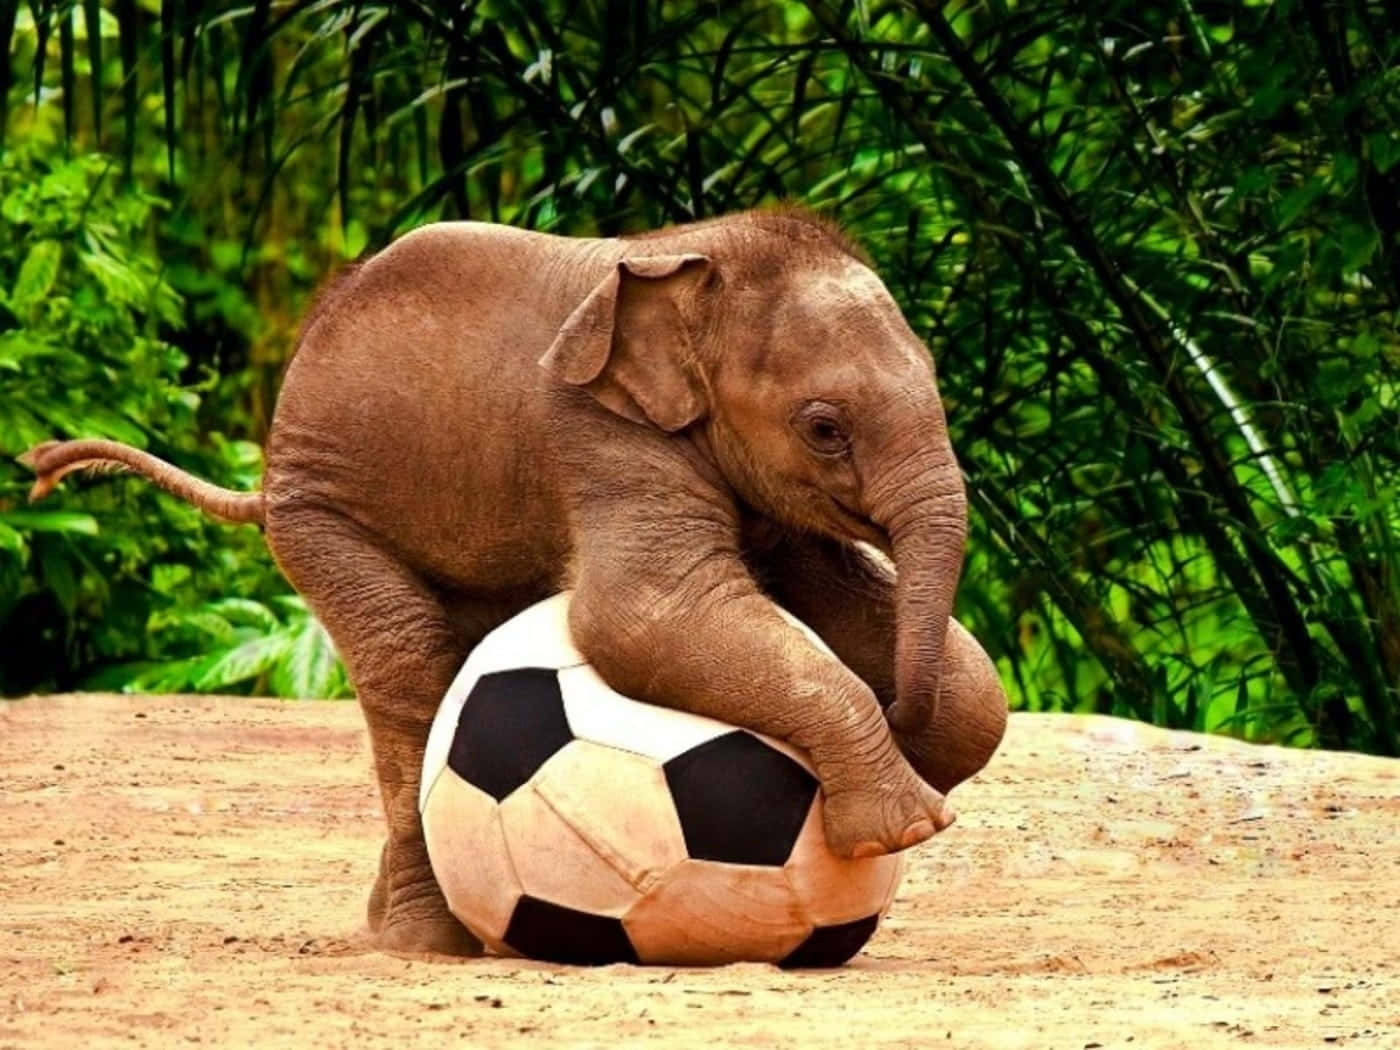 A Baby Elephant Playing With A Soccer Ball